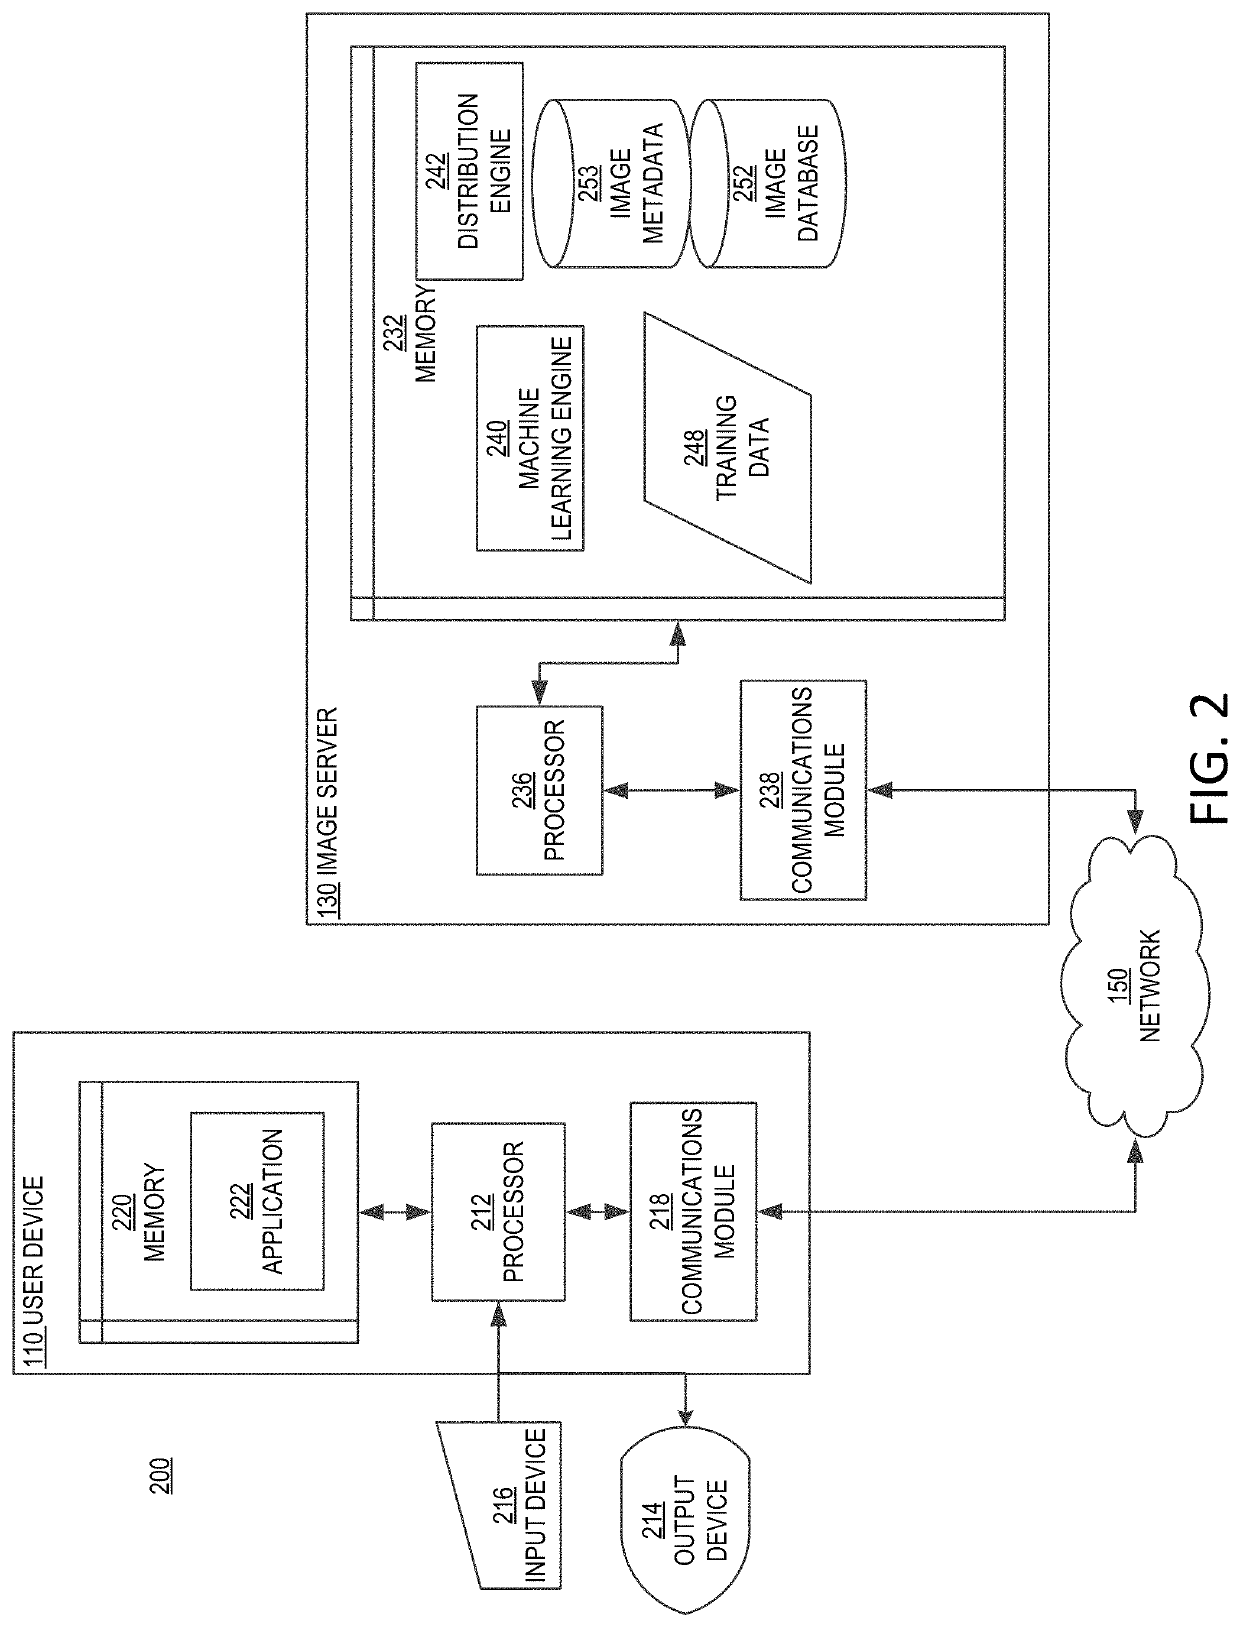 Augmented reality image retrieval systems and methods